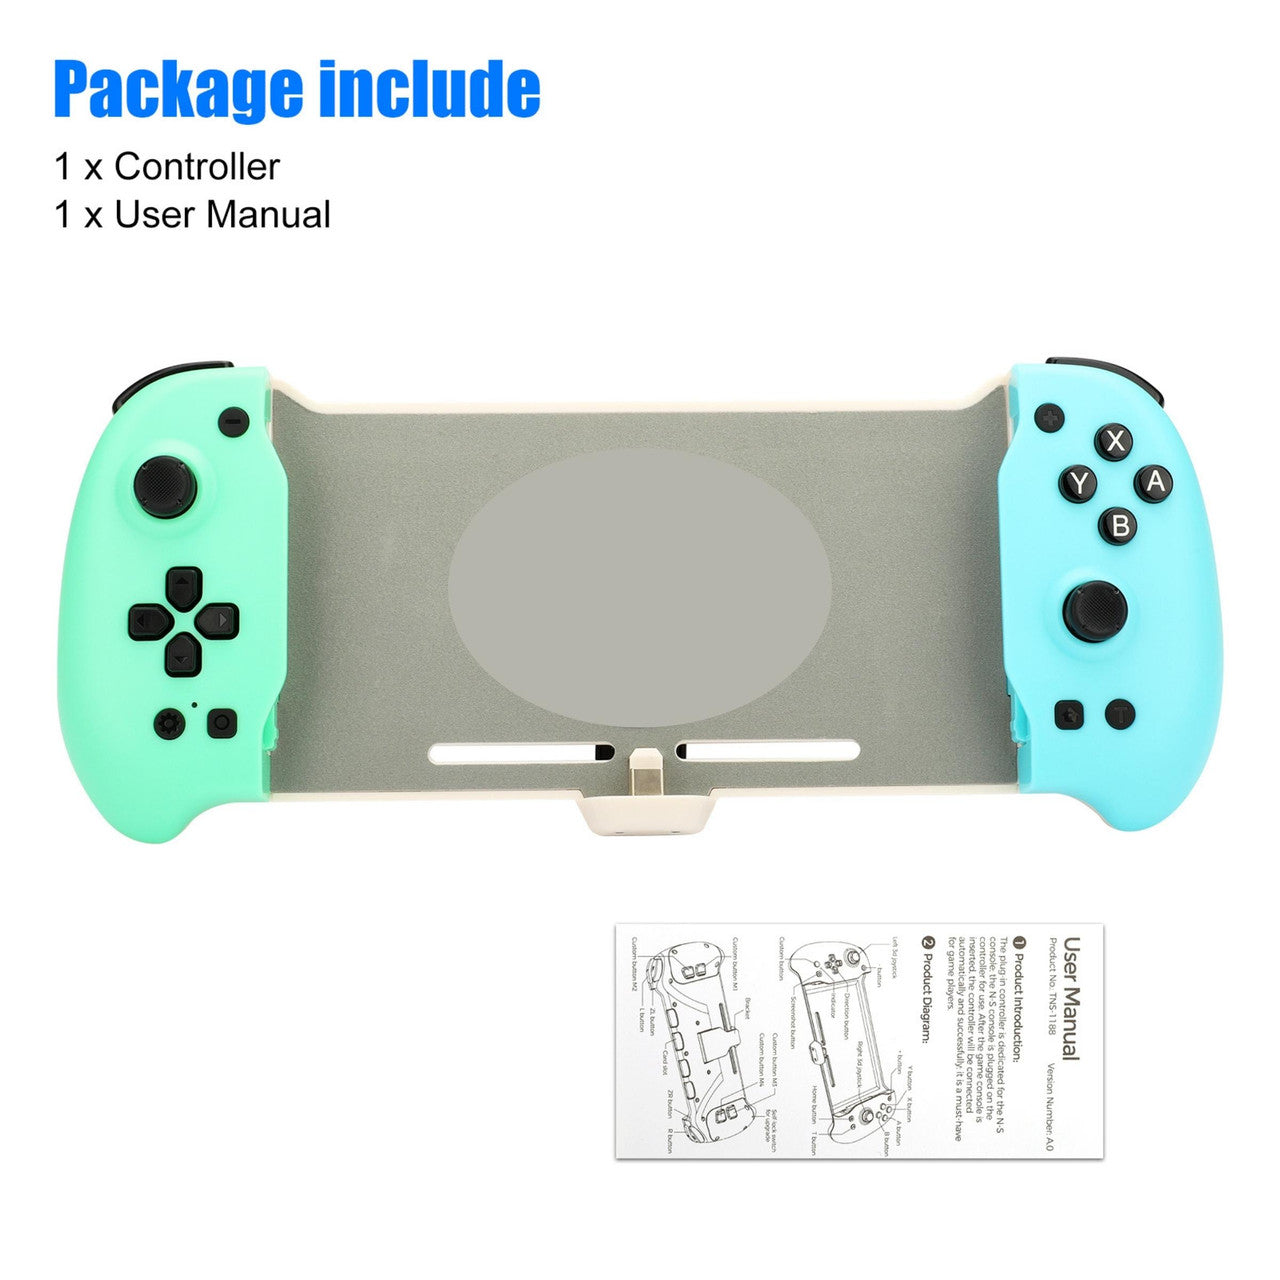 Handheld Grip Handheld Grip Controller - for Nintendo Switch/OLED Joypad Controller Replacement Controler Support Wakeup Screenshot Dual Motor VibrationNintendo Switch